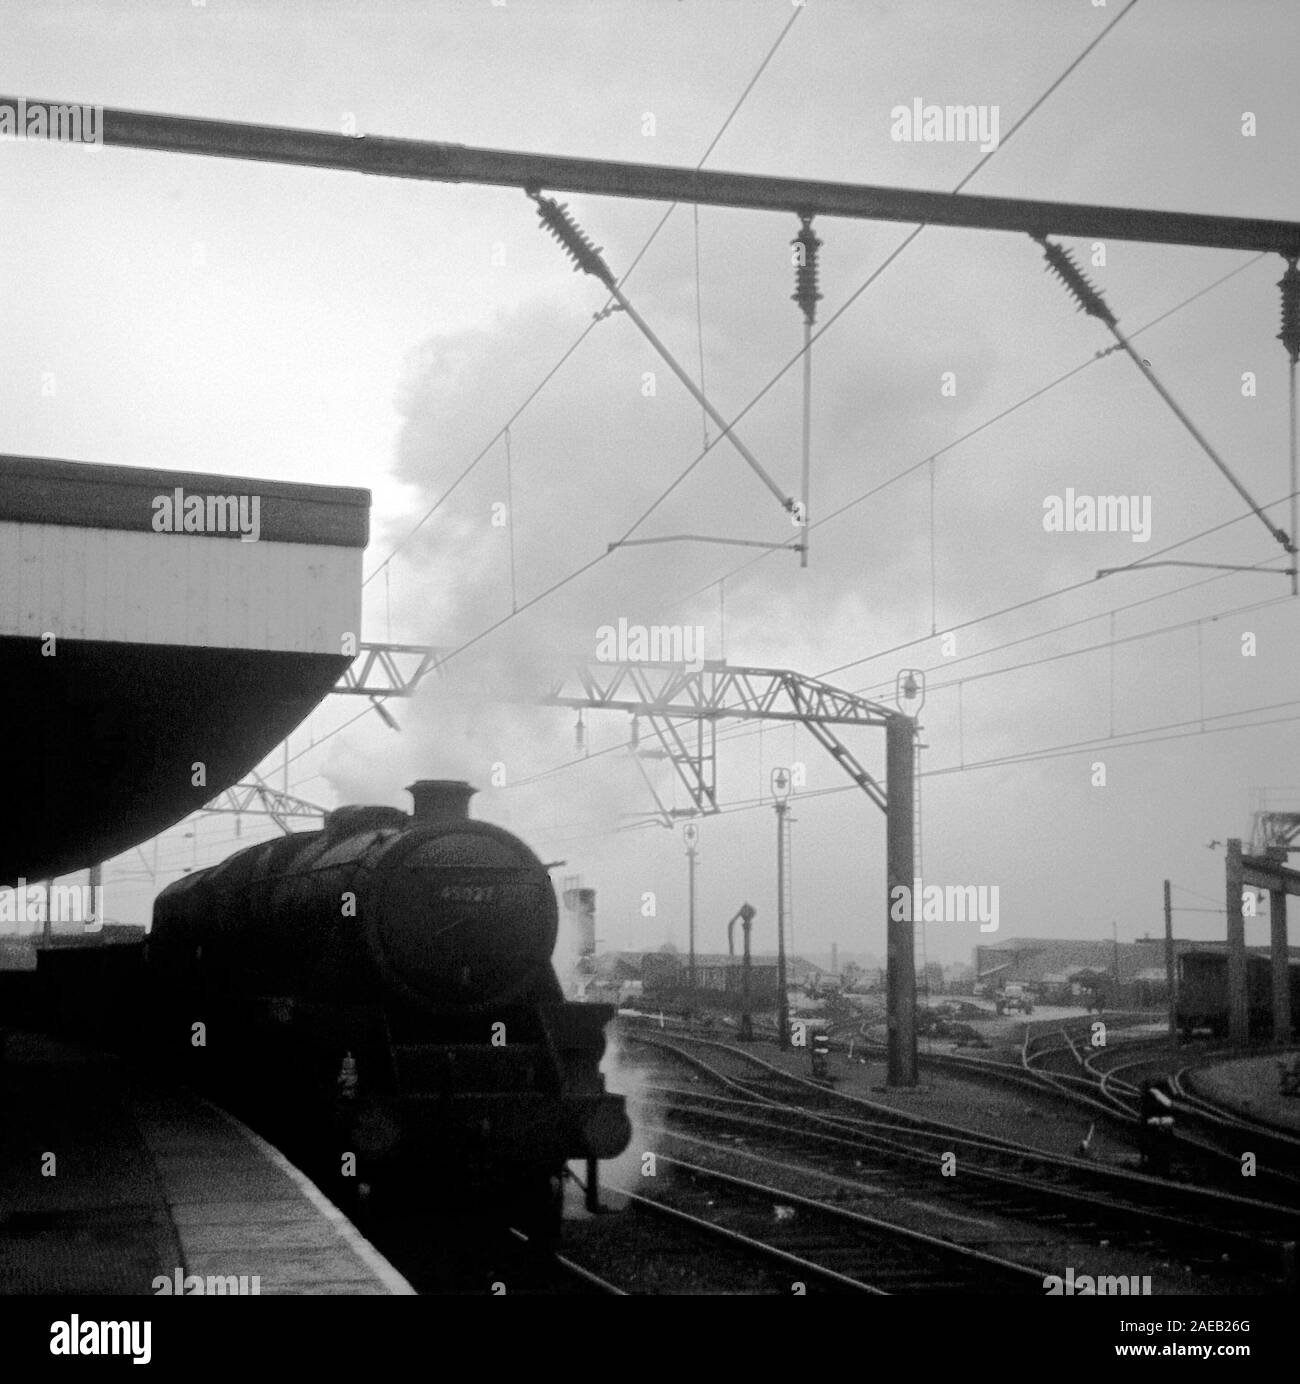 Steam trains running on British railways in 1967, towards the end of main line steam at Stockport, Lancashire, Northern England, UK Stock Photo